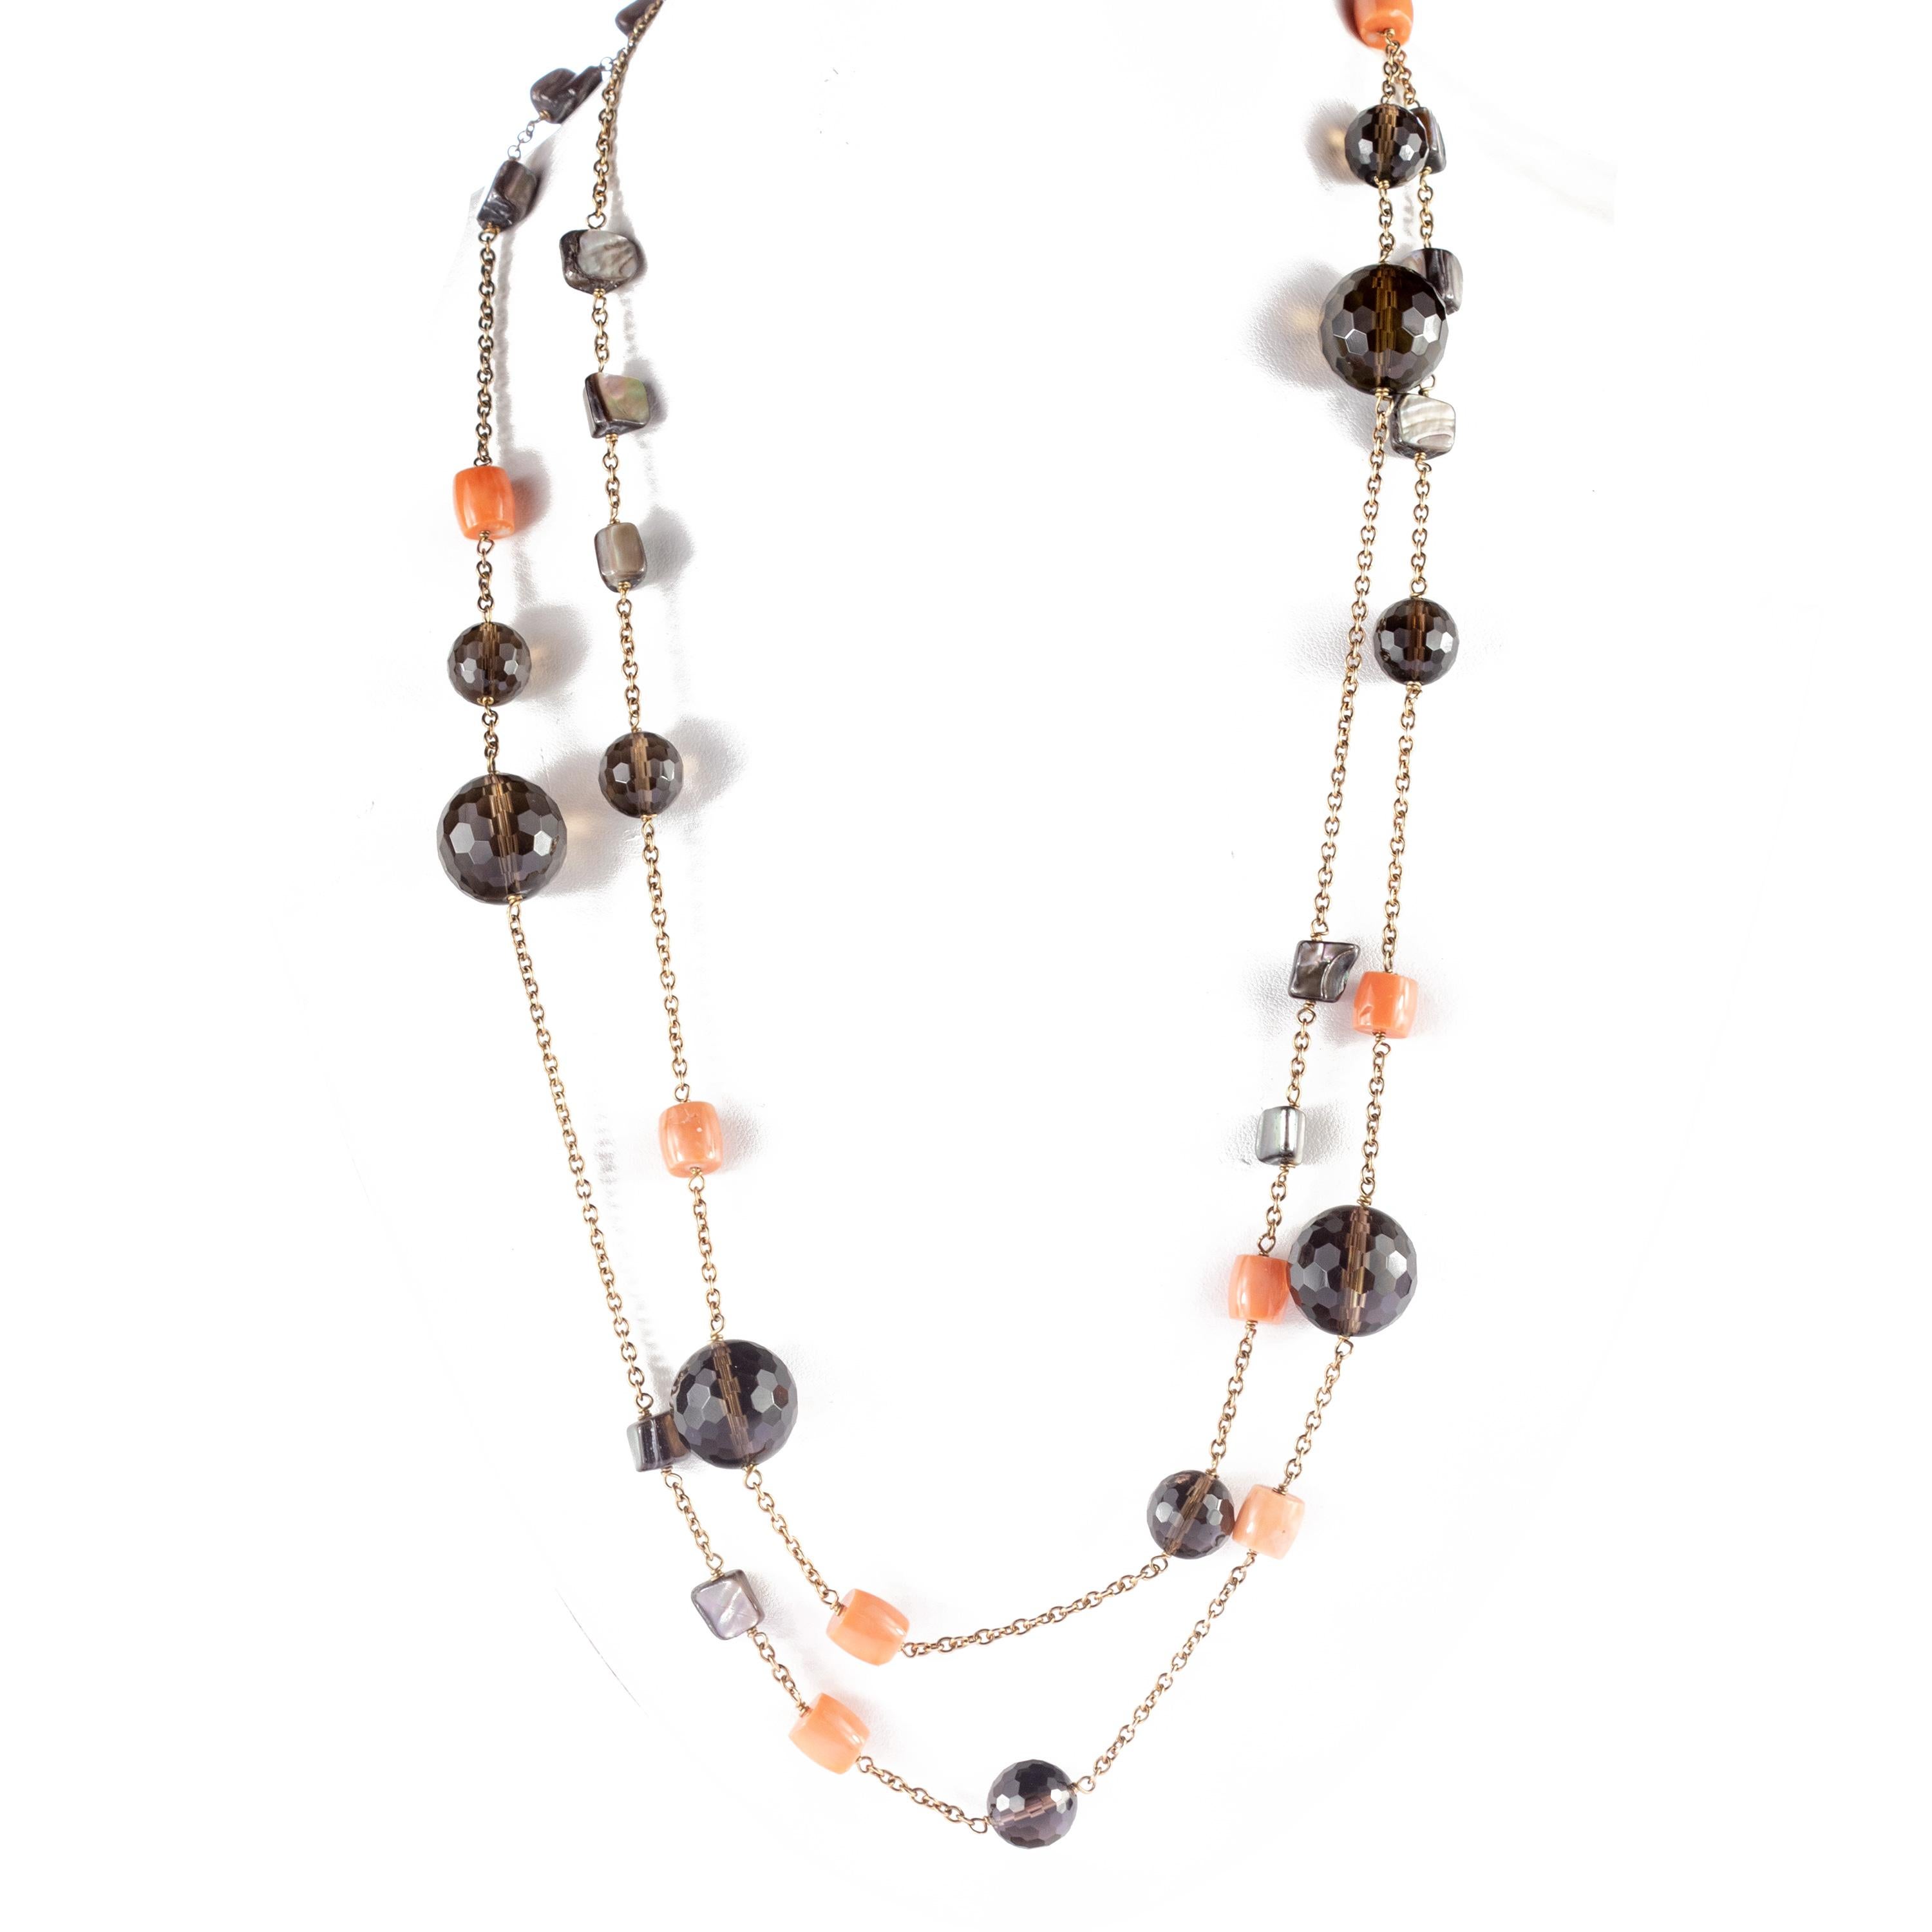 One of a kind impressive handmade precious fume quartz spheres, coral cubes and mother of pearl uneven cubes necklace.  Embellished with extraordinary colors evoking a volcano. Oranges, brown, whites and multiple hues come together to highlight a